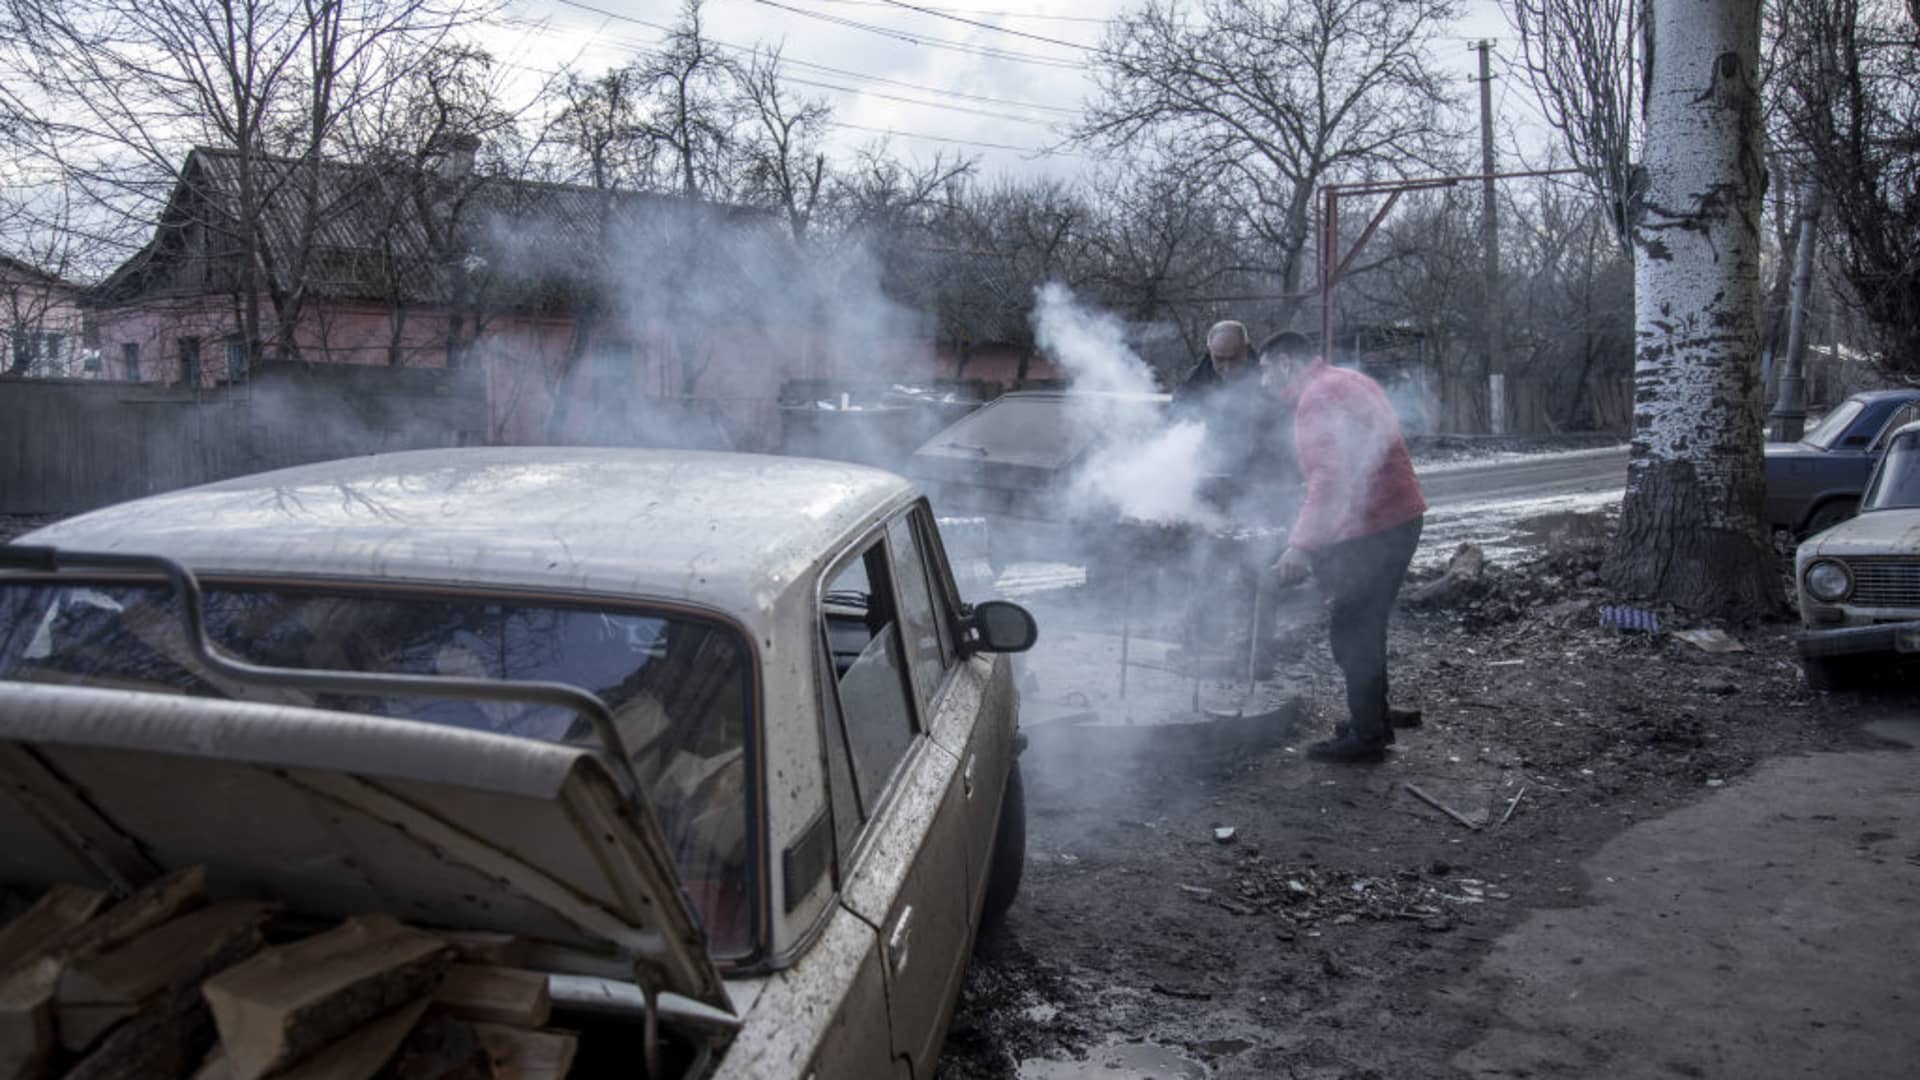 Locals gather next to a grocery shop as grill meat on the street on east Chasiv Yar nearby Bakhmut frontline as fighting continues between Ukrainian forces and Russian troops for control of the city in Donetsk Oblast Ukraine on March 12, 2023.